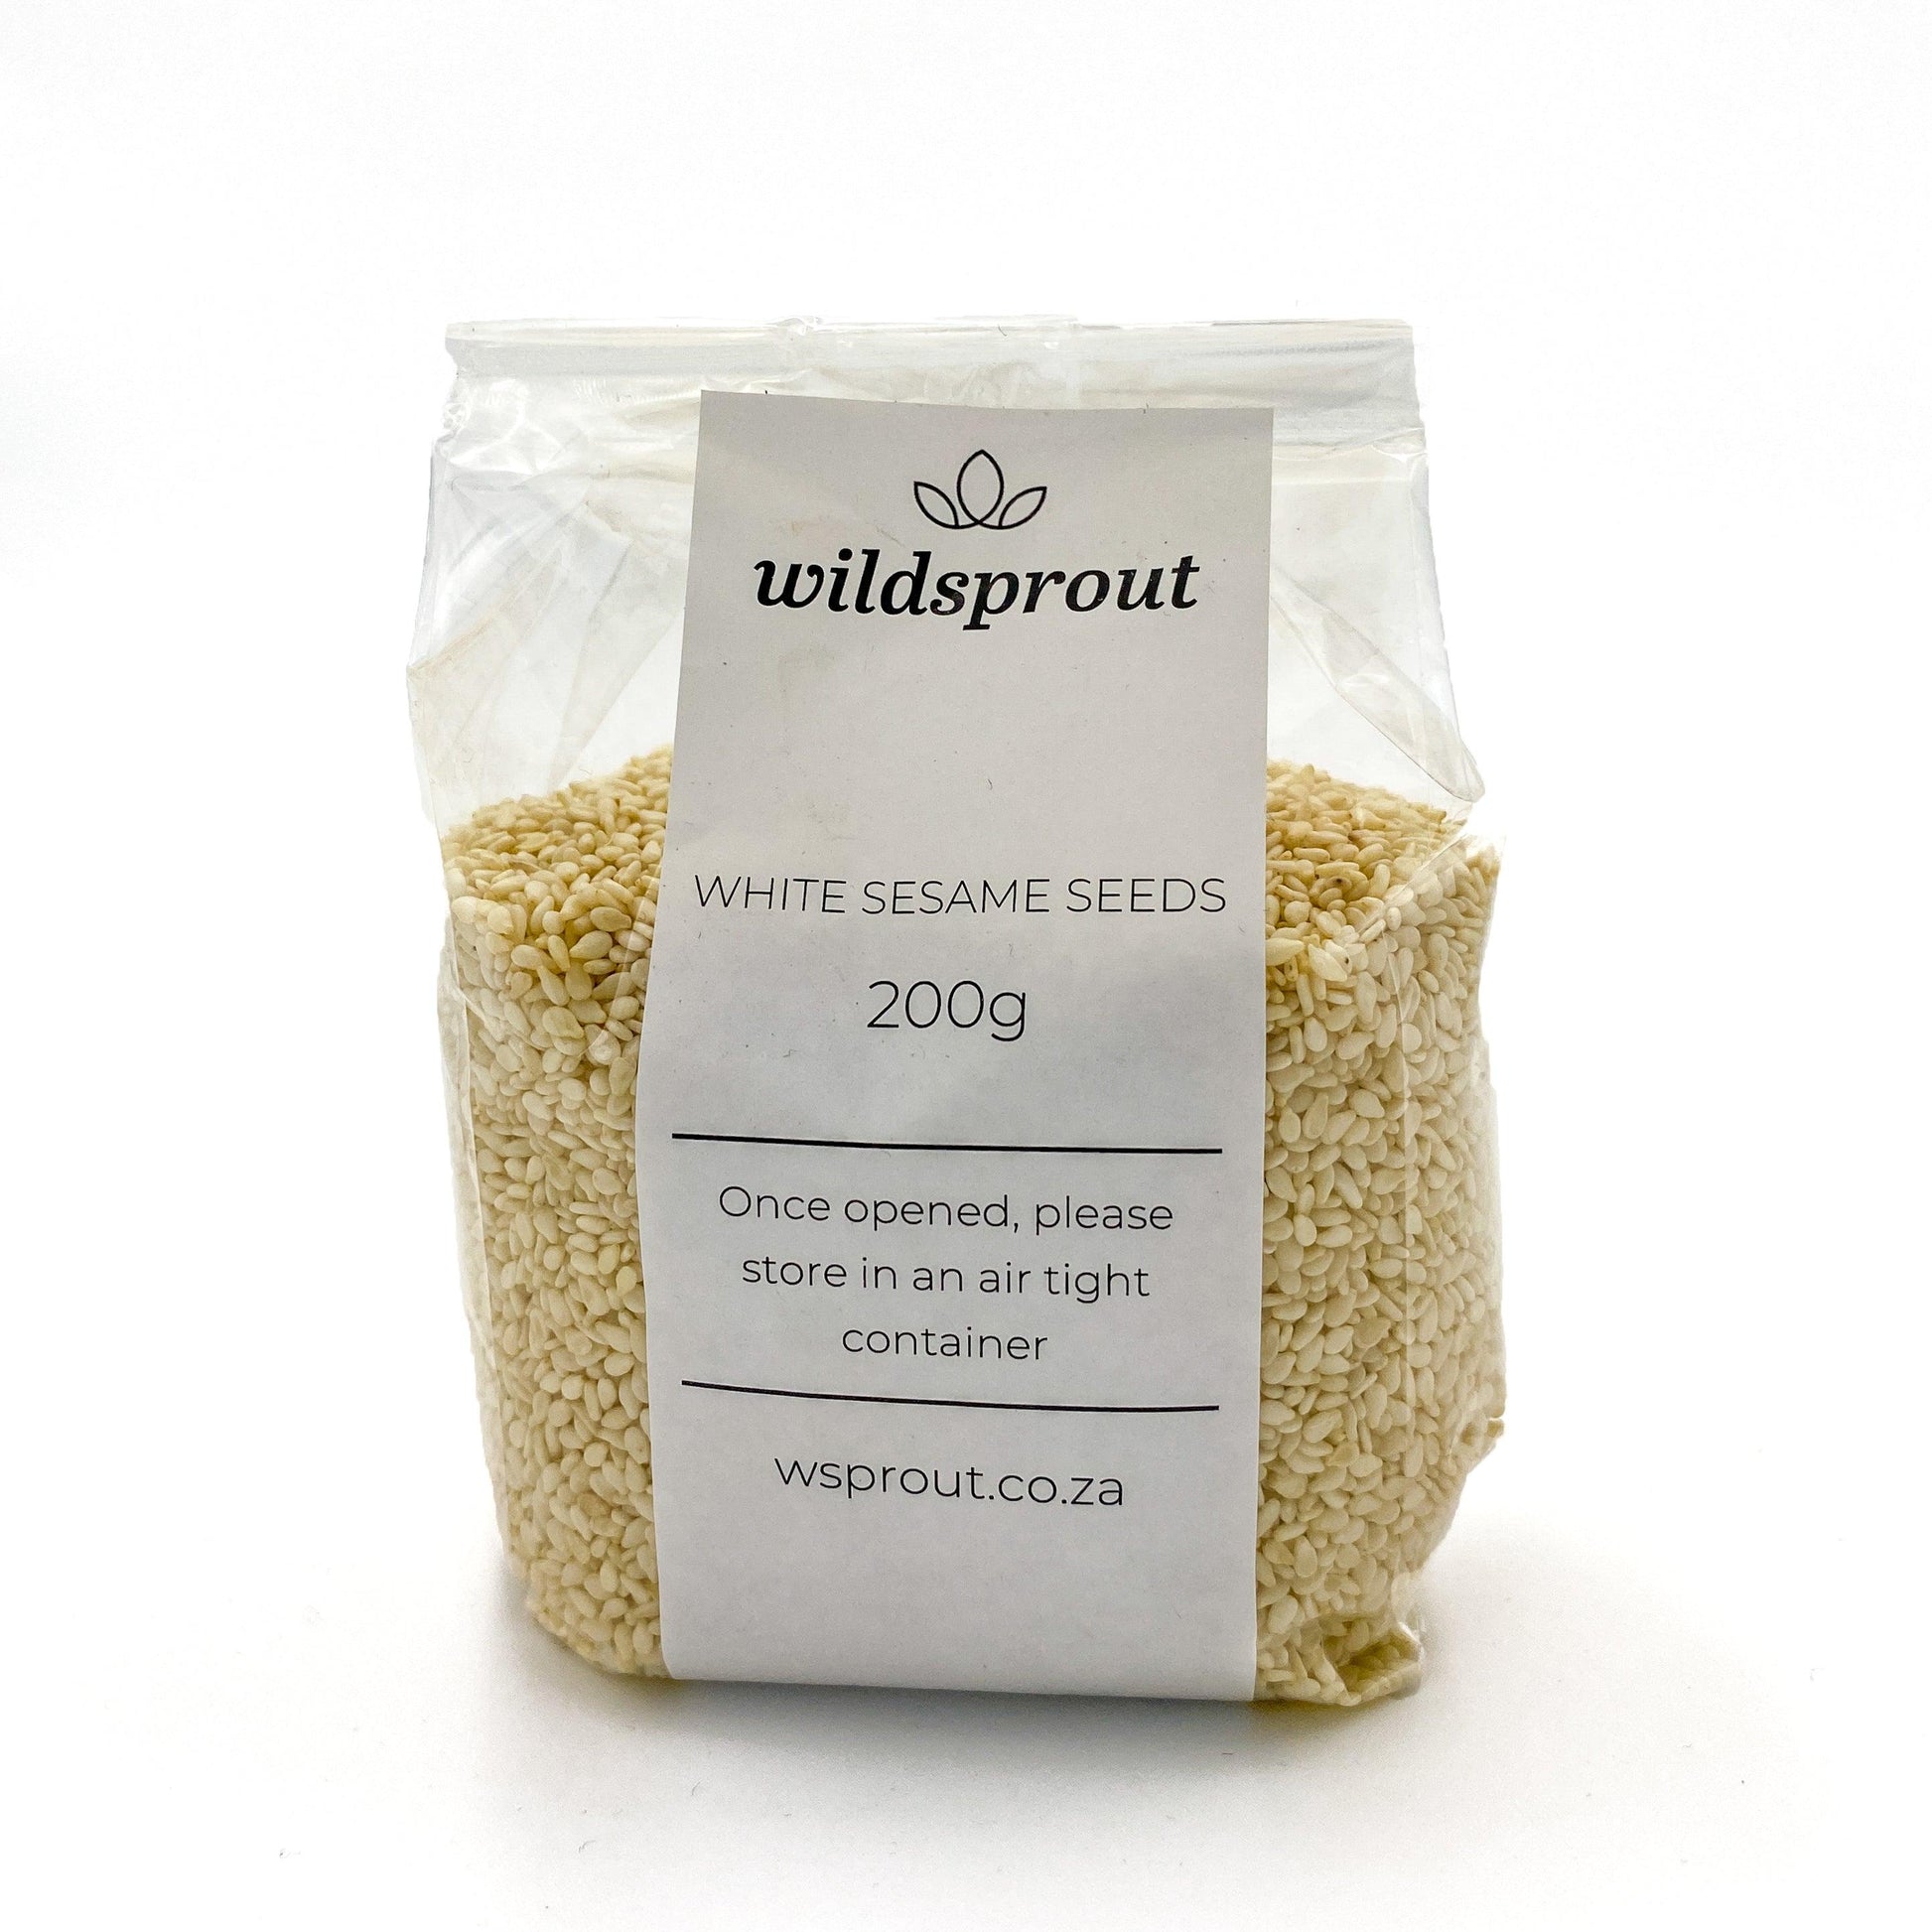 White Sesame Seeds 200g - Wildsprout